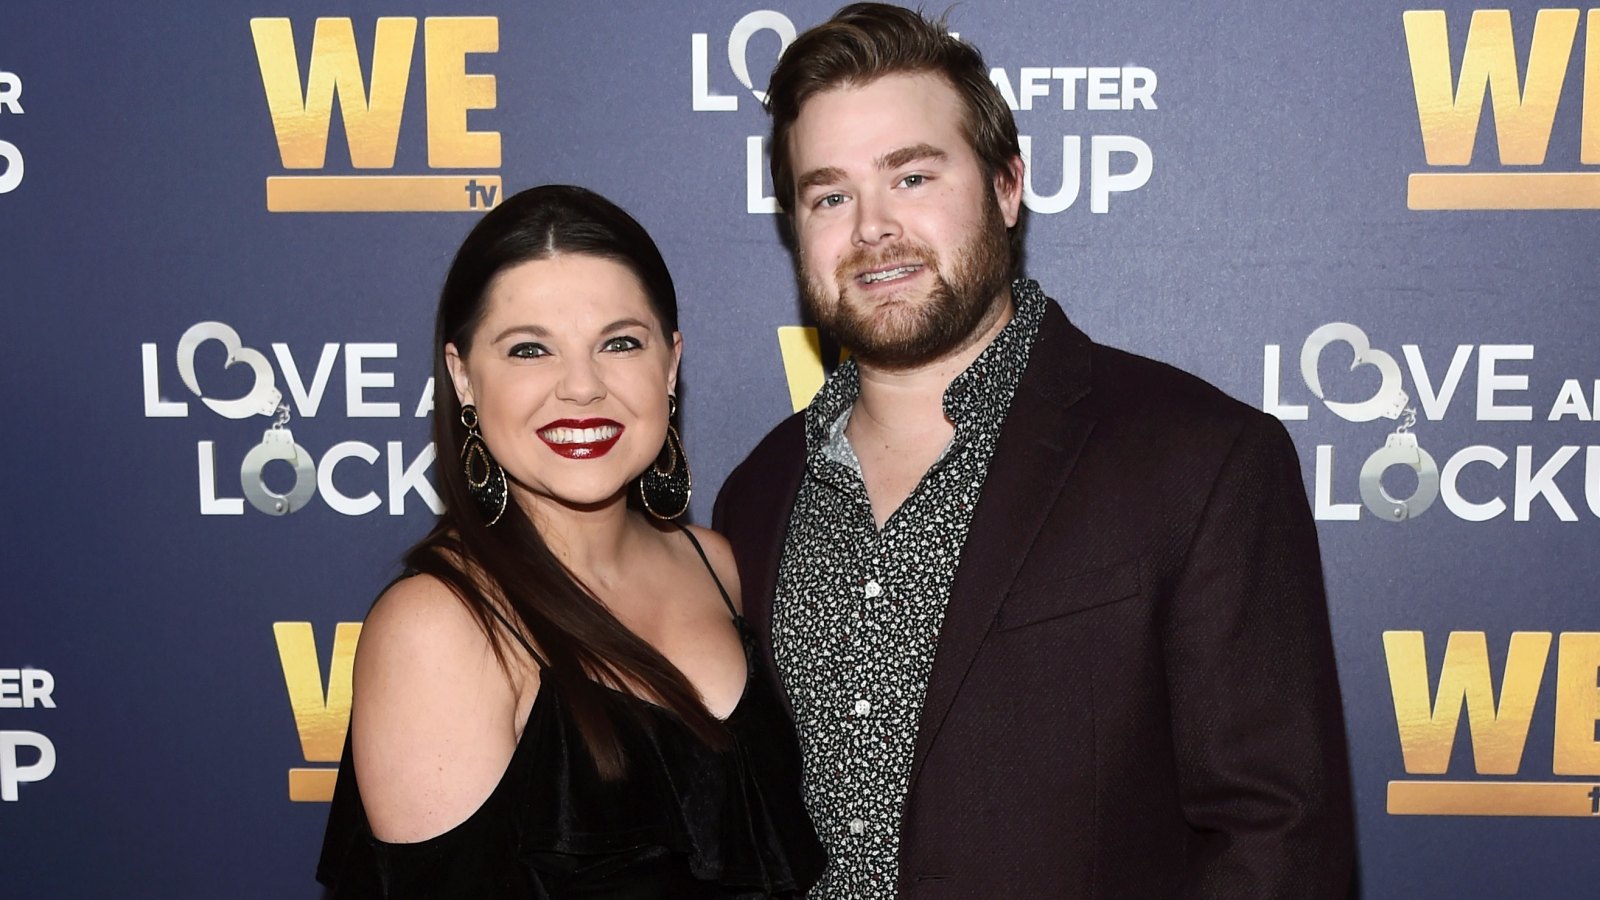 Amy Duggar and Husband Dillon King Reveal Gender of Their First Child